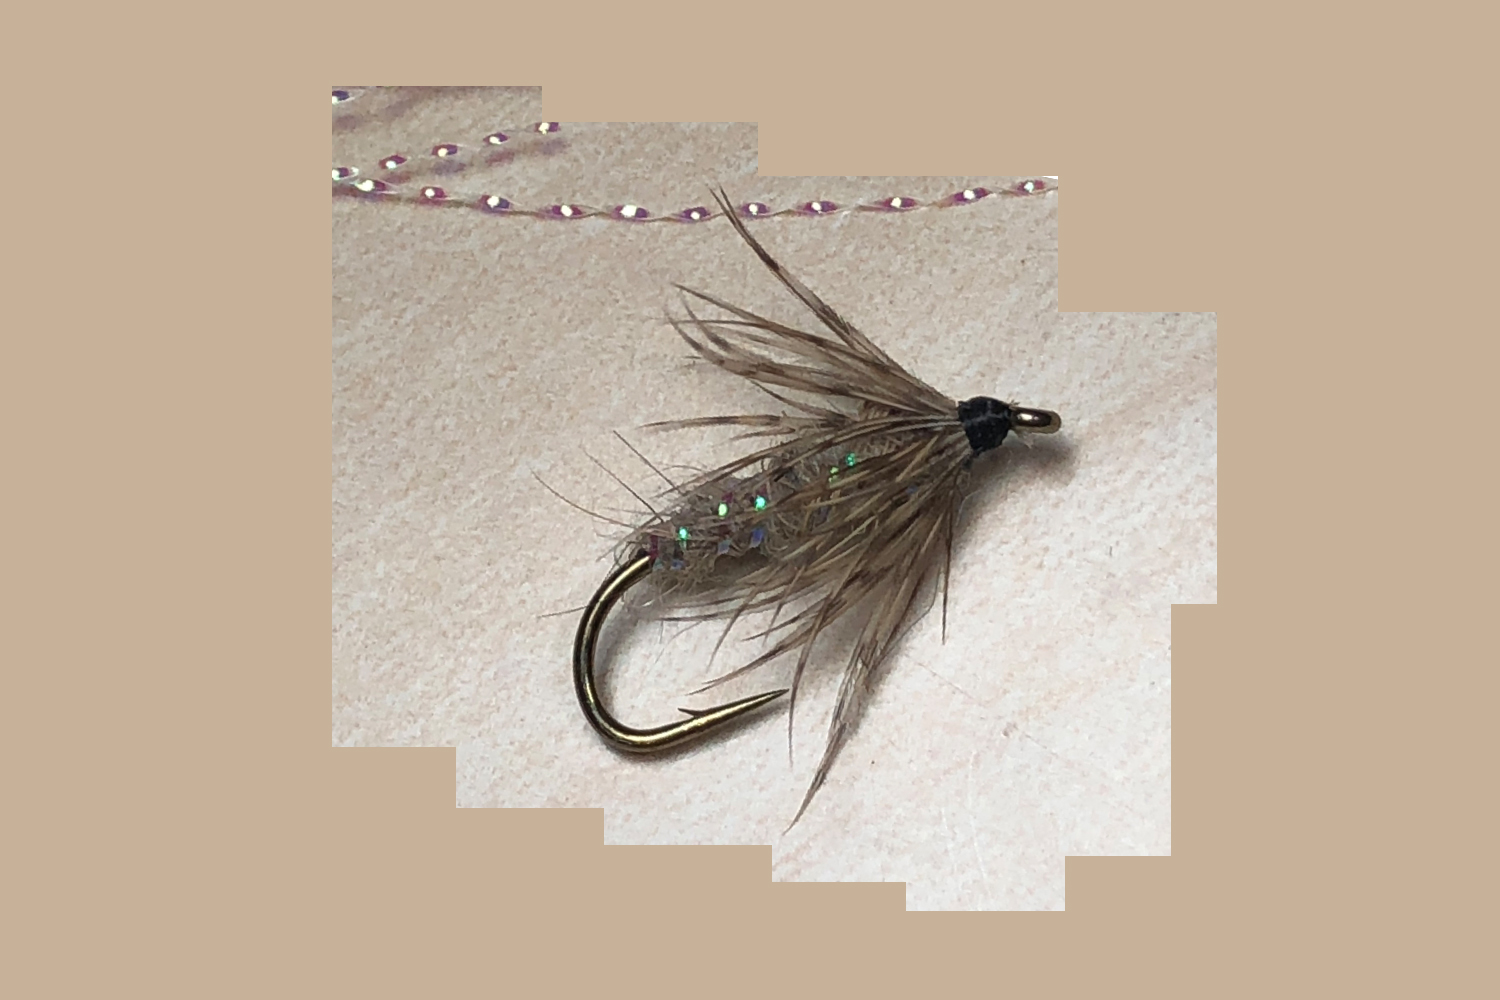 Soft Hackle, Feathers for tying Soft Hackle Flies